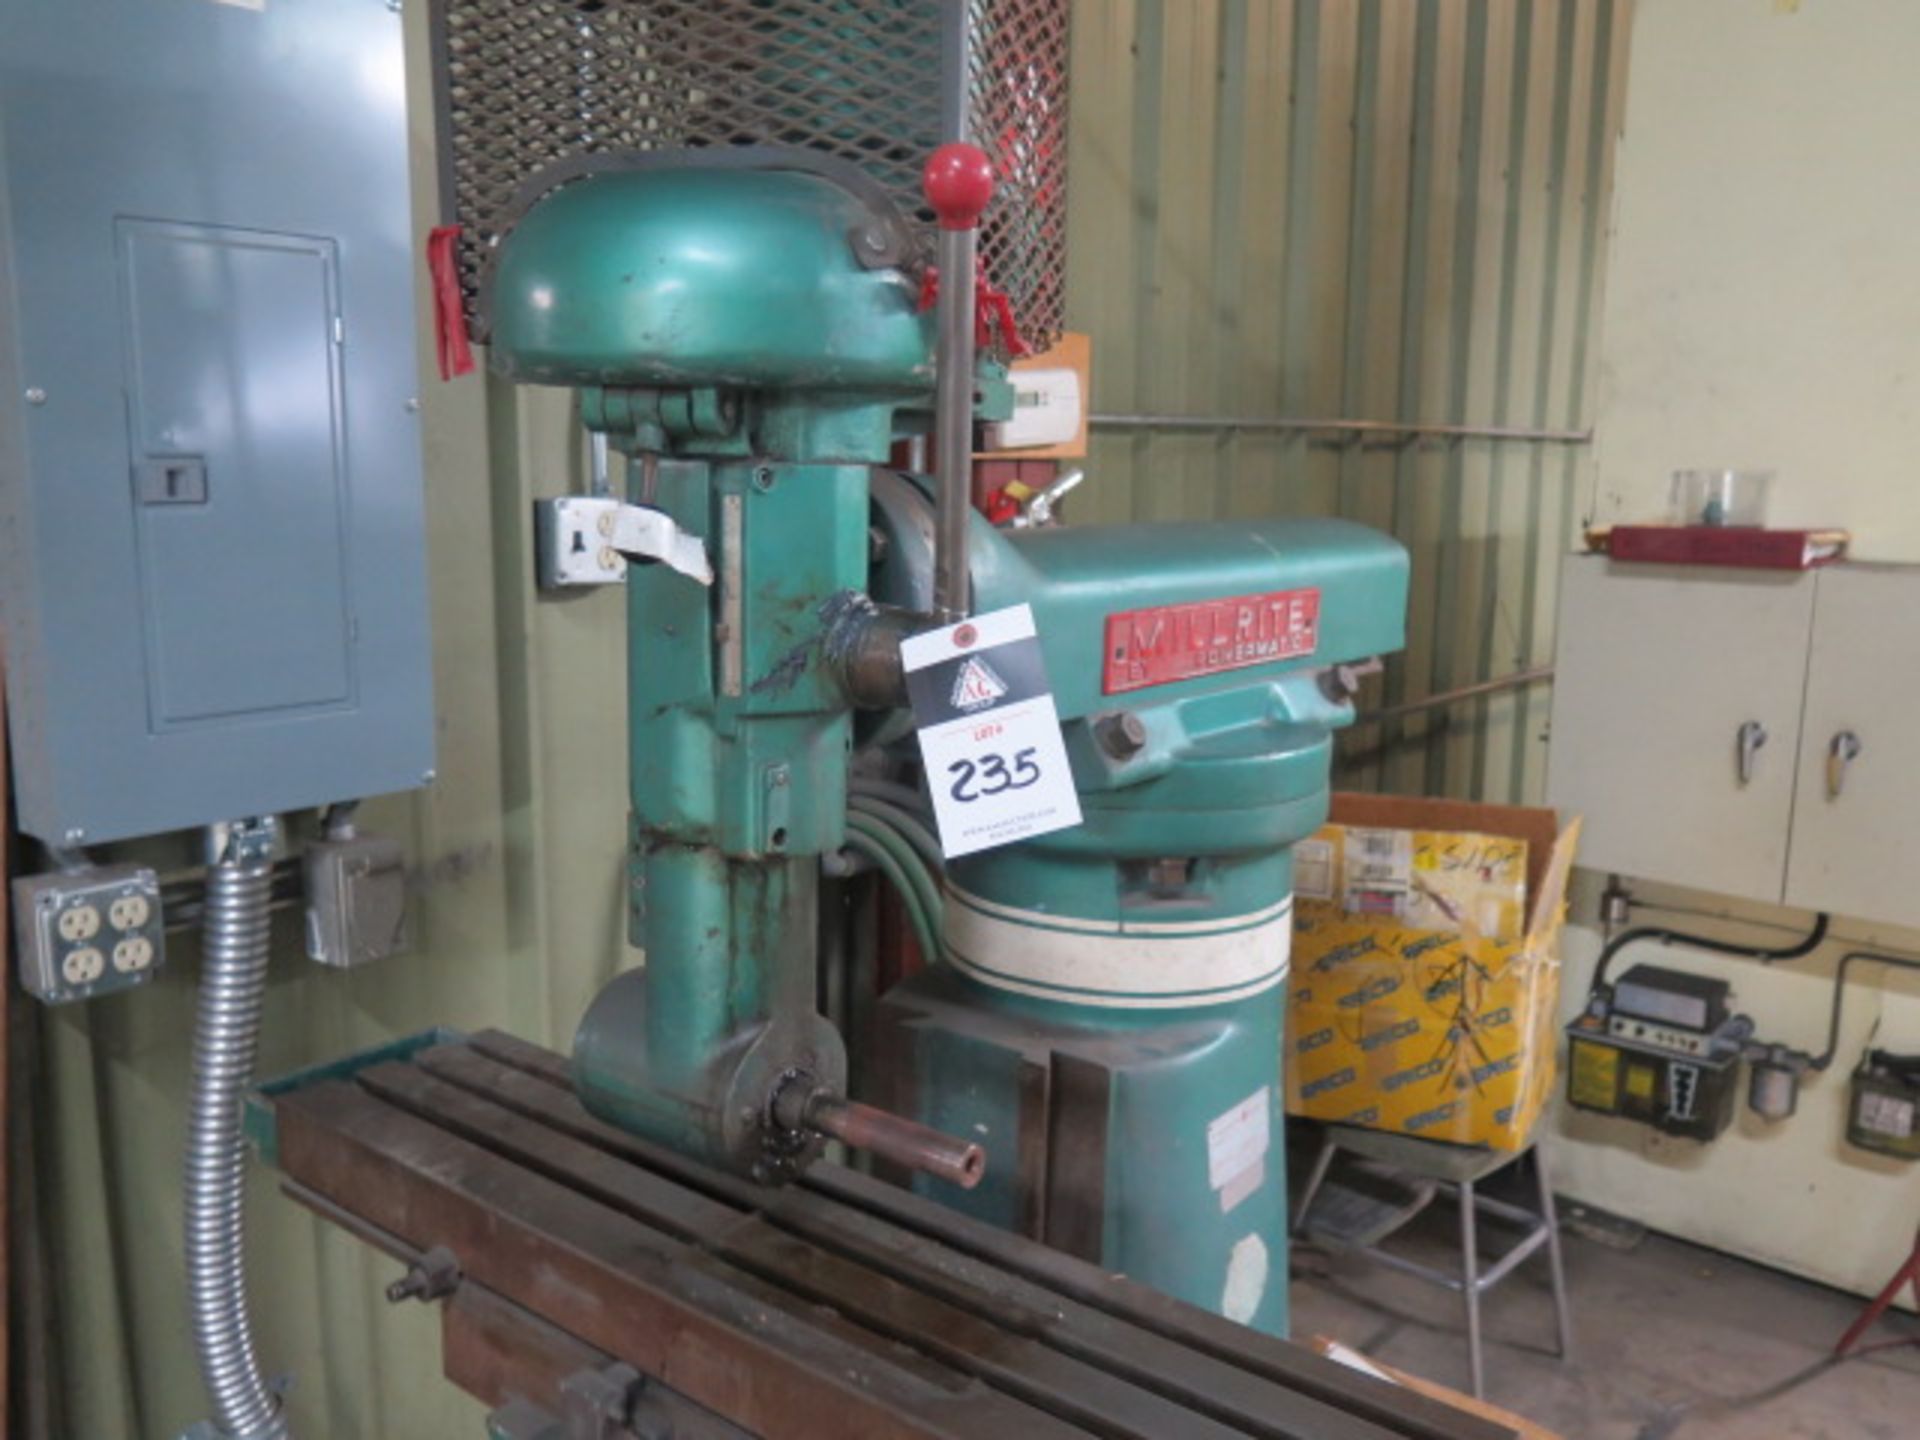 Powermatic Millrite Vertical Mill w/ 90 Degree Milling Head, Power Feed, 8" x 36" Table SOLD AS IS - Image 3 of 7